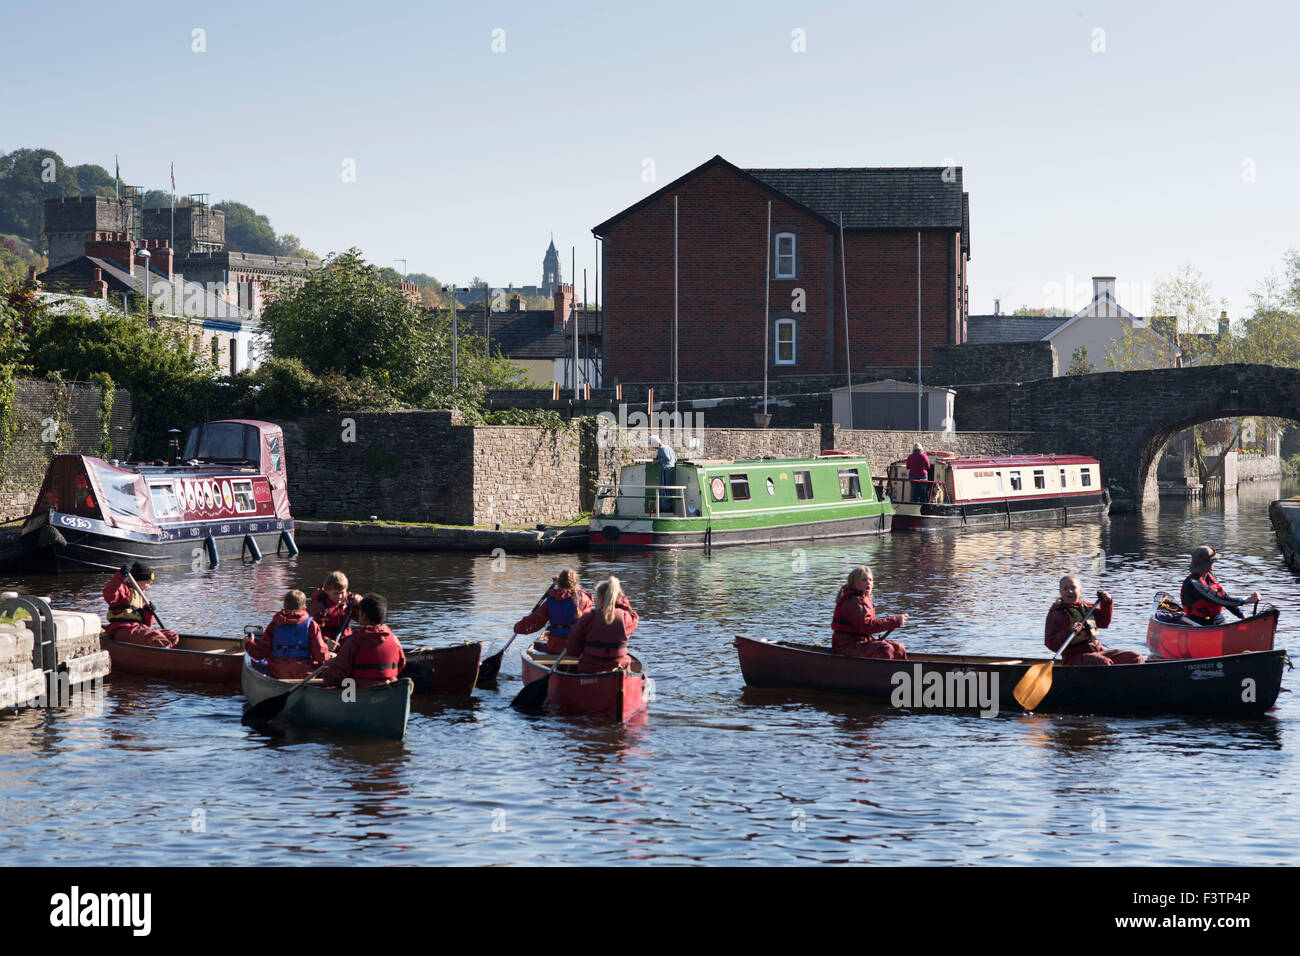 Kayakers in the Monmouthshire and Brecon Canal in Brecon, South Wales. Stock Photo